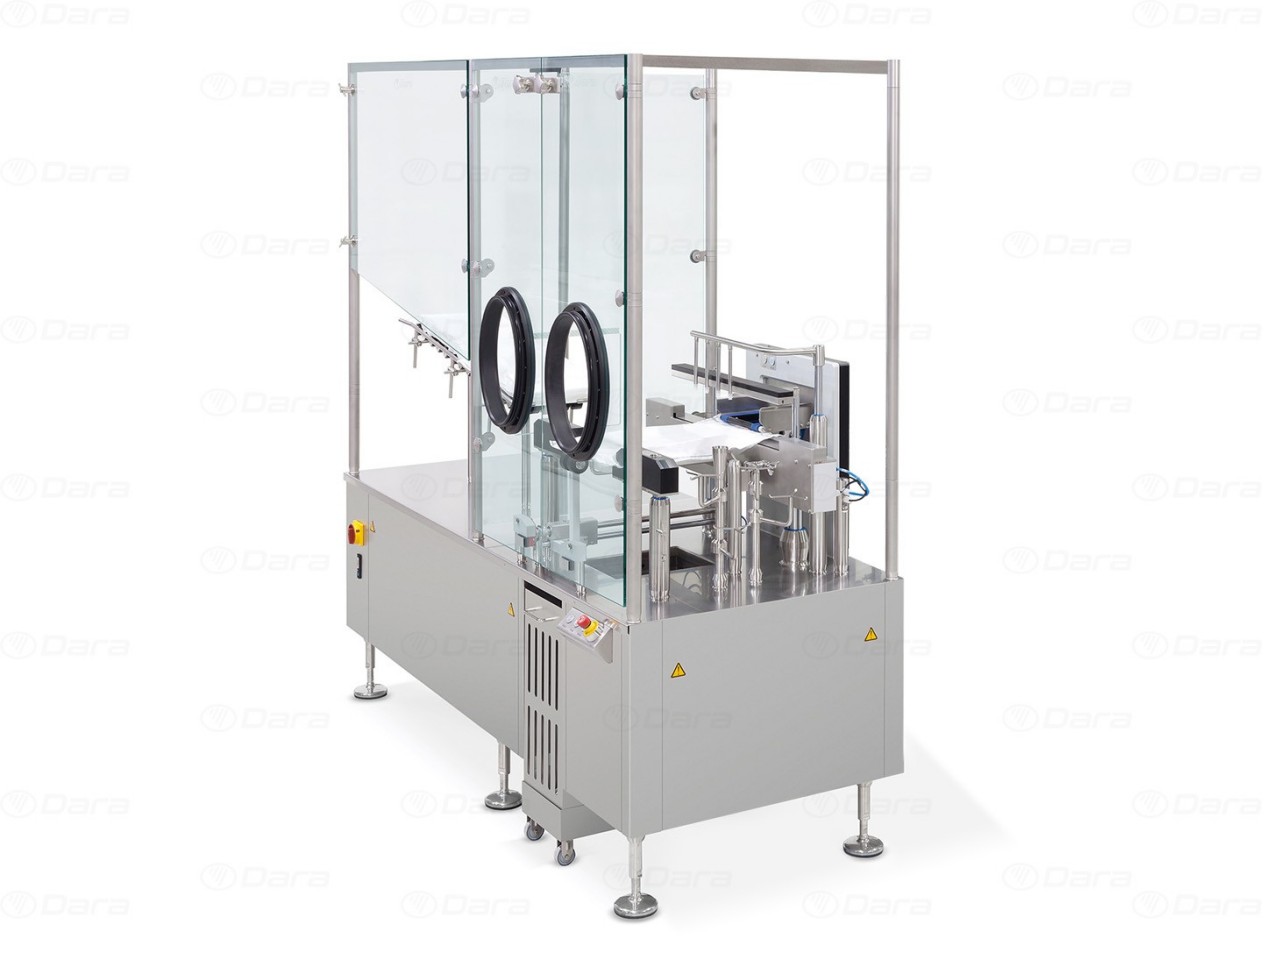 Automatic debagging for vials, syringes and RTU cartridges